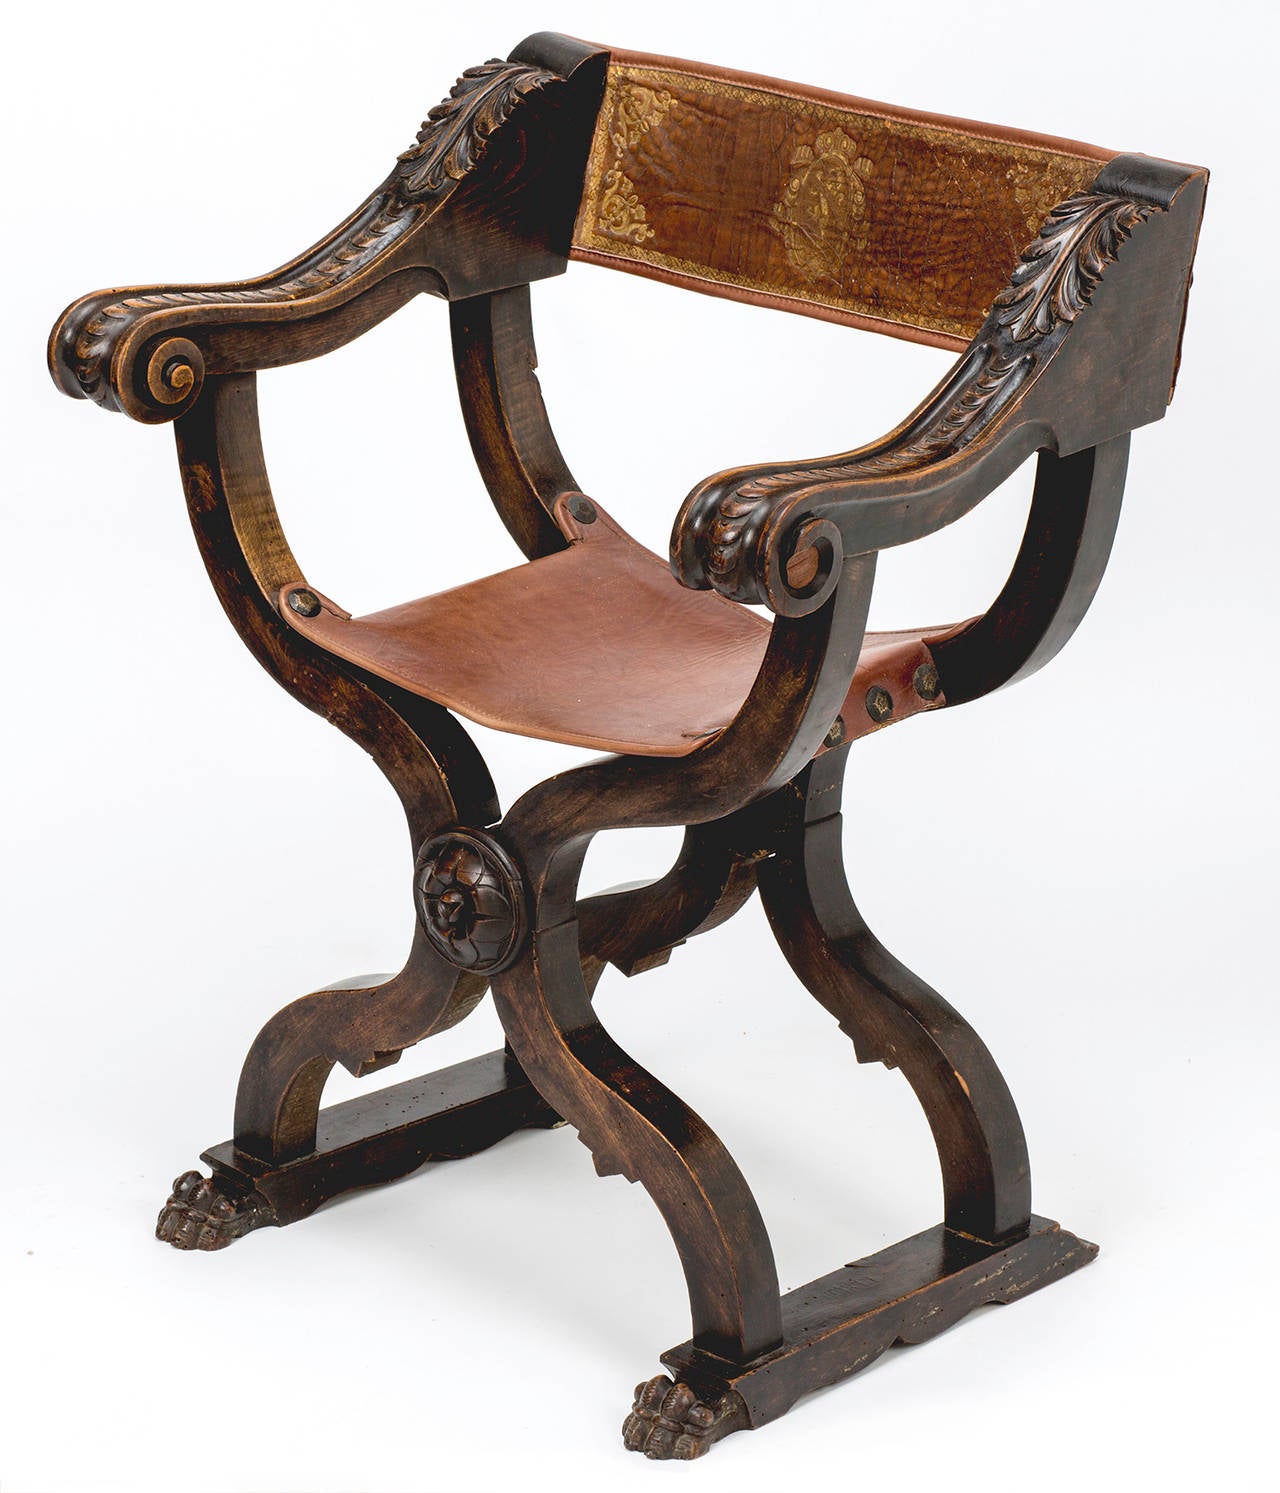 Italian, circa 1870s, beautiful pair of Savonarola style chairs. Leather strap seats and leather backs. Black leather strap is embossed in gold leather tooling. Beautifully carved wood frames. Wood patina is warmly aged over the years.
Seat straps